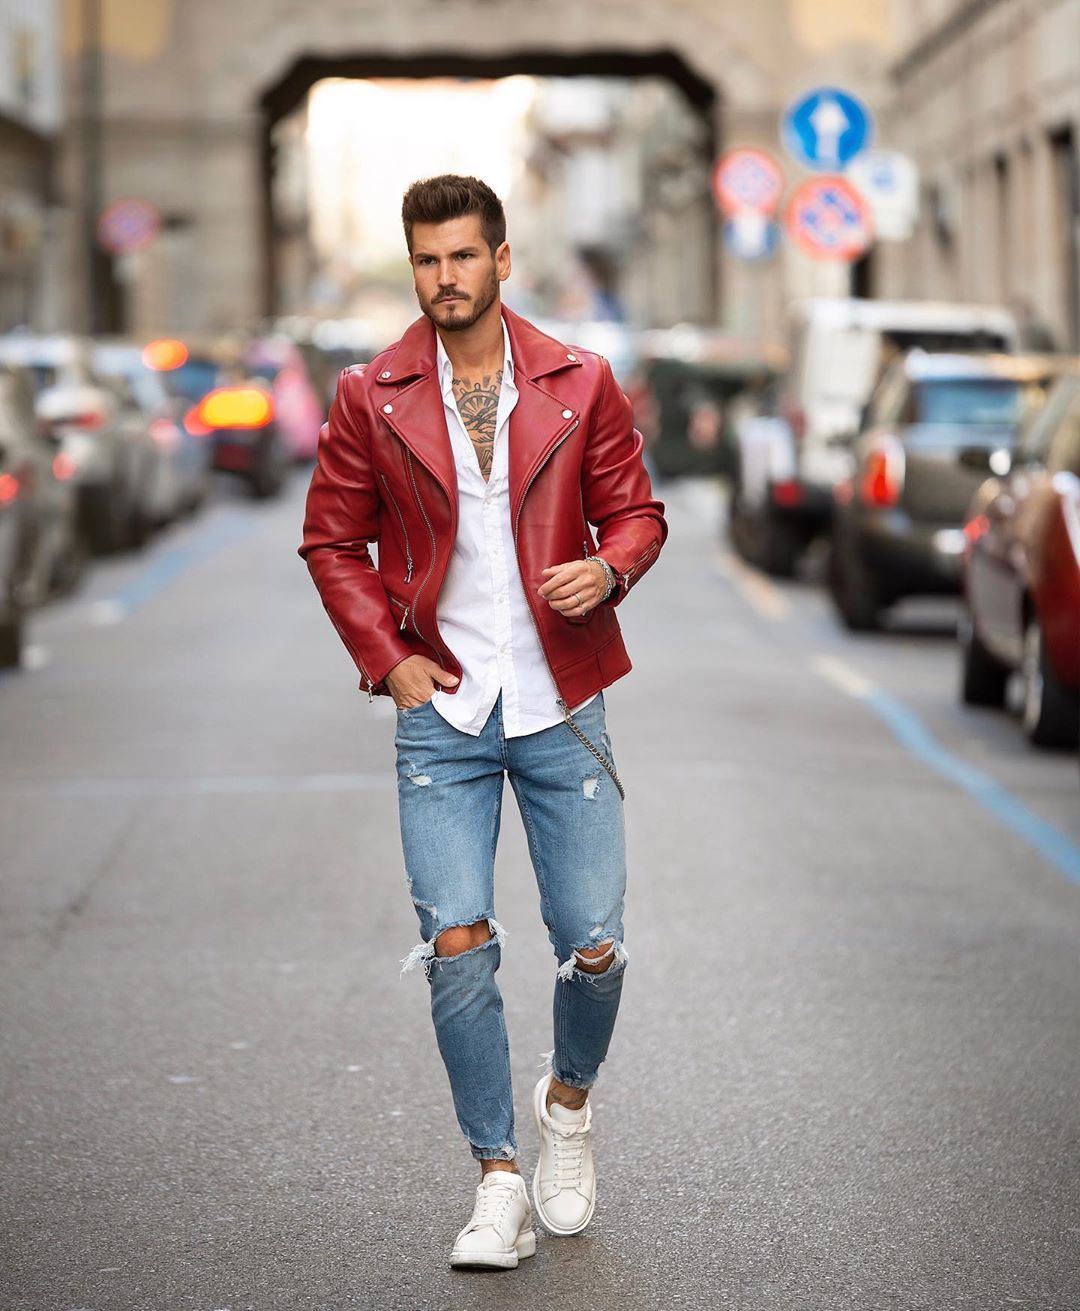 Red-Leather-Jacket | Trends Leather Clothing's Are Back - Crave4leather